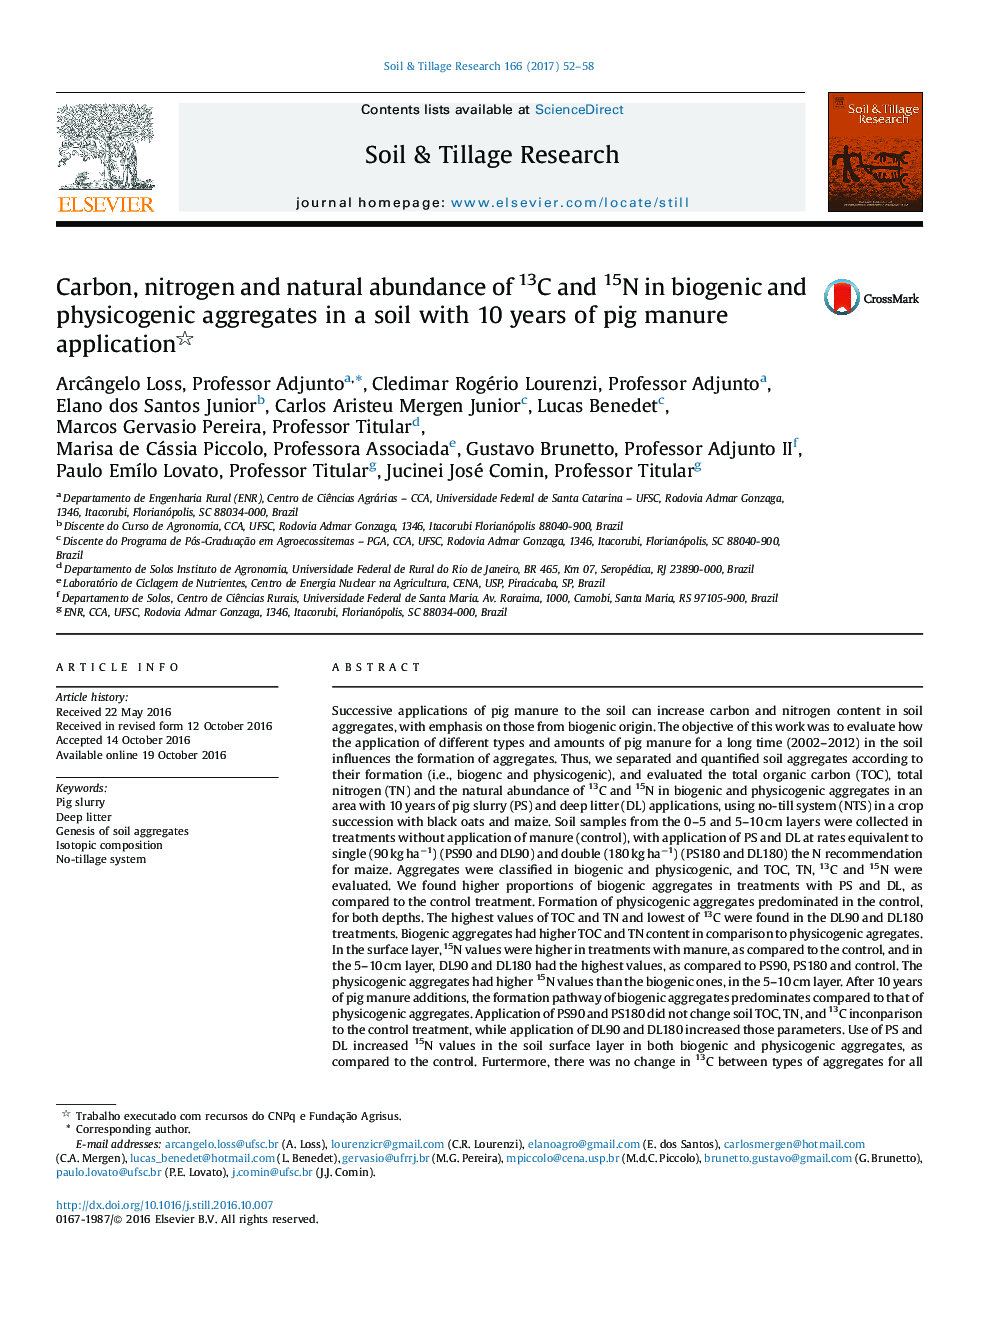 Carbon, nitrogen and natural abundance of 13C and 15N in biogenic and physicogenic aggregates in a soil with 10 years of pig manure application